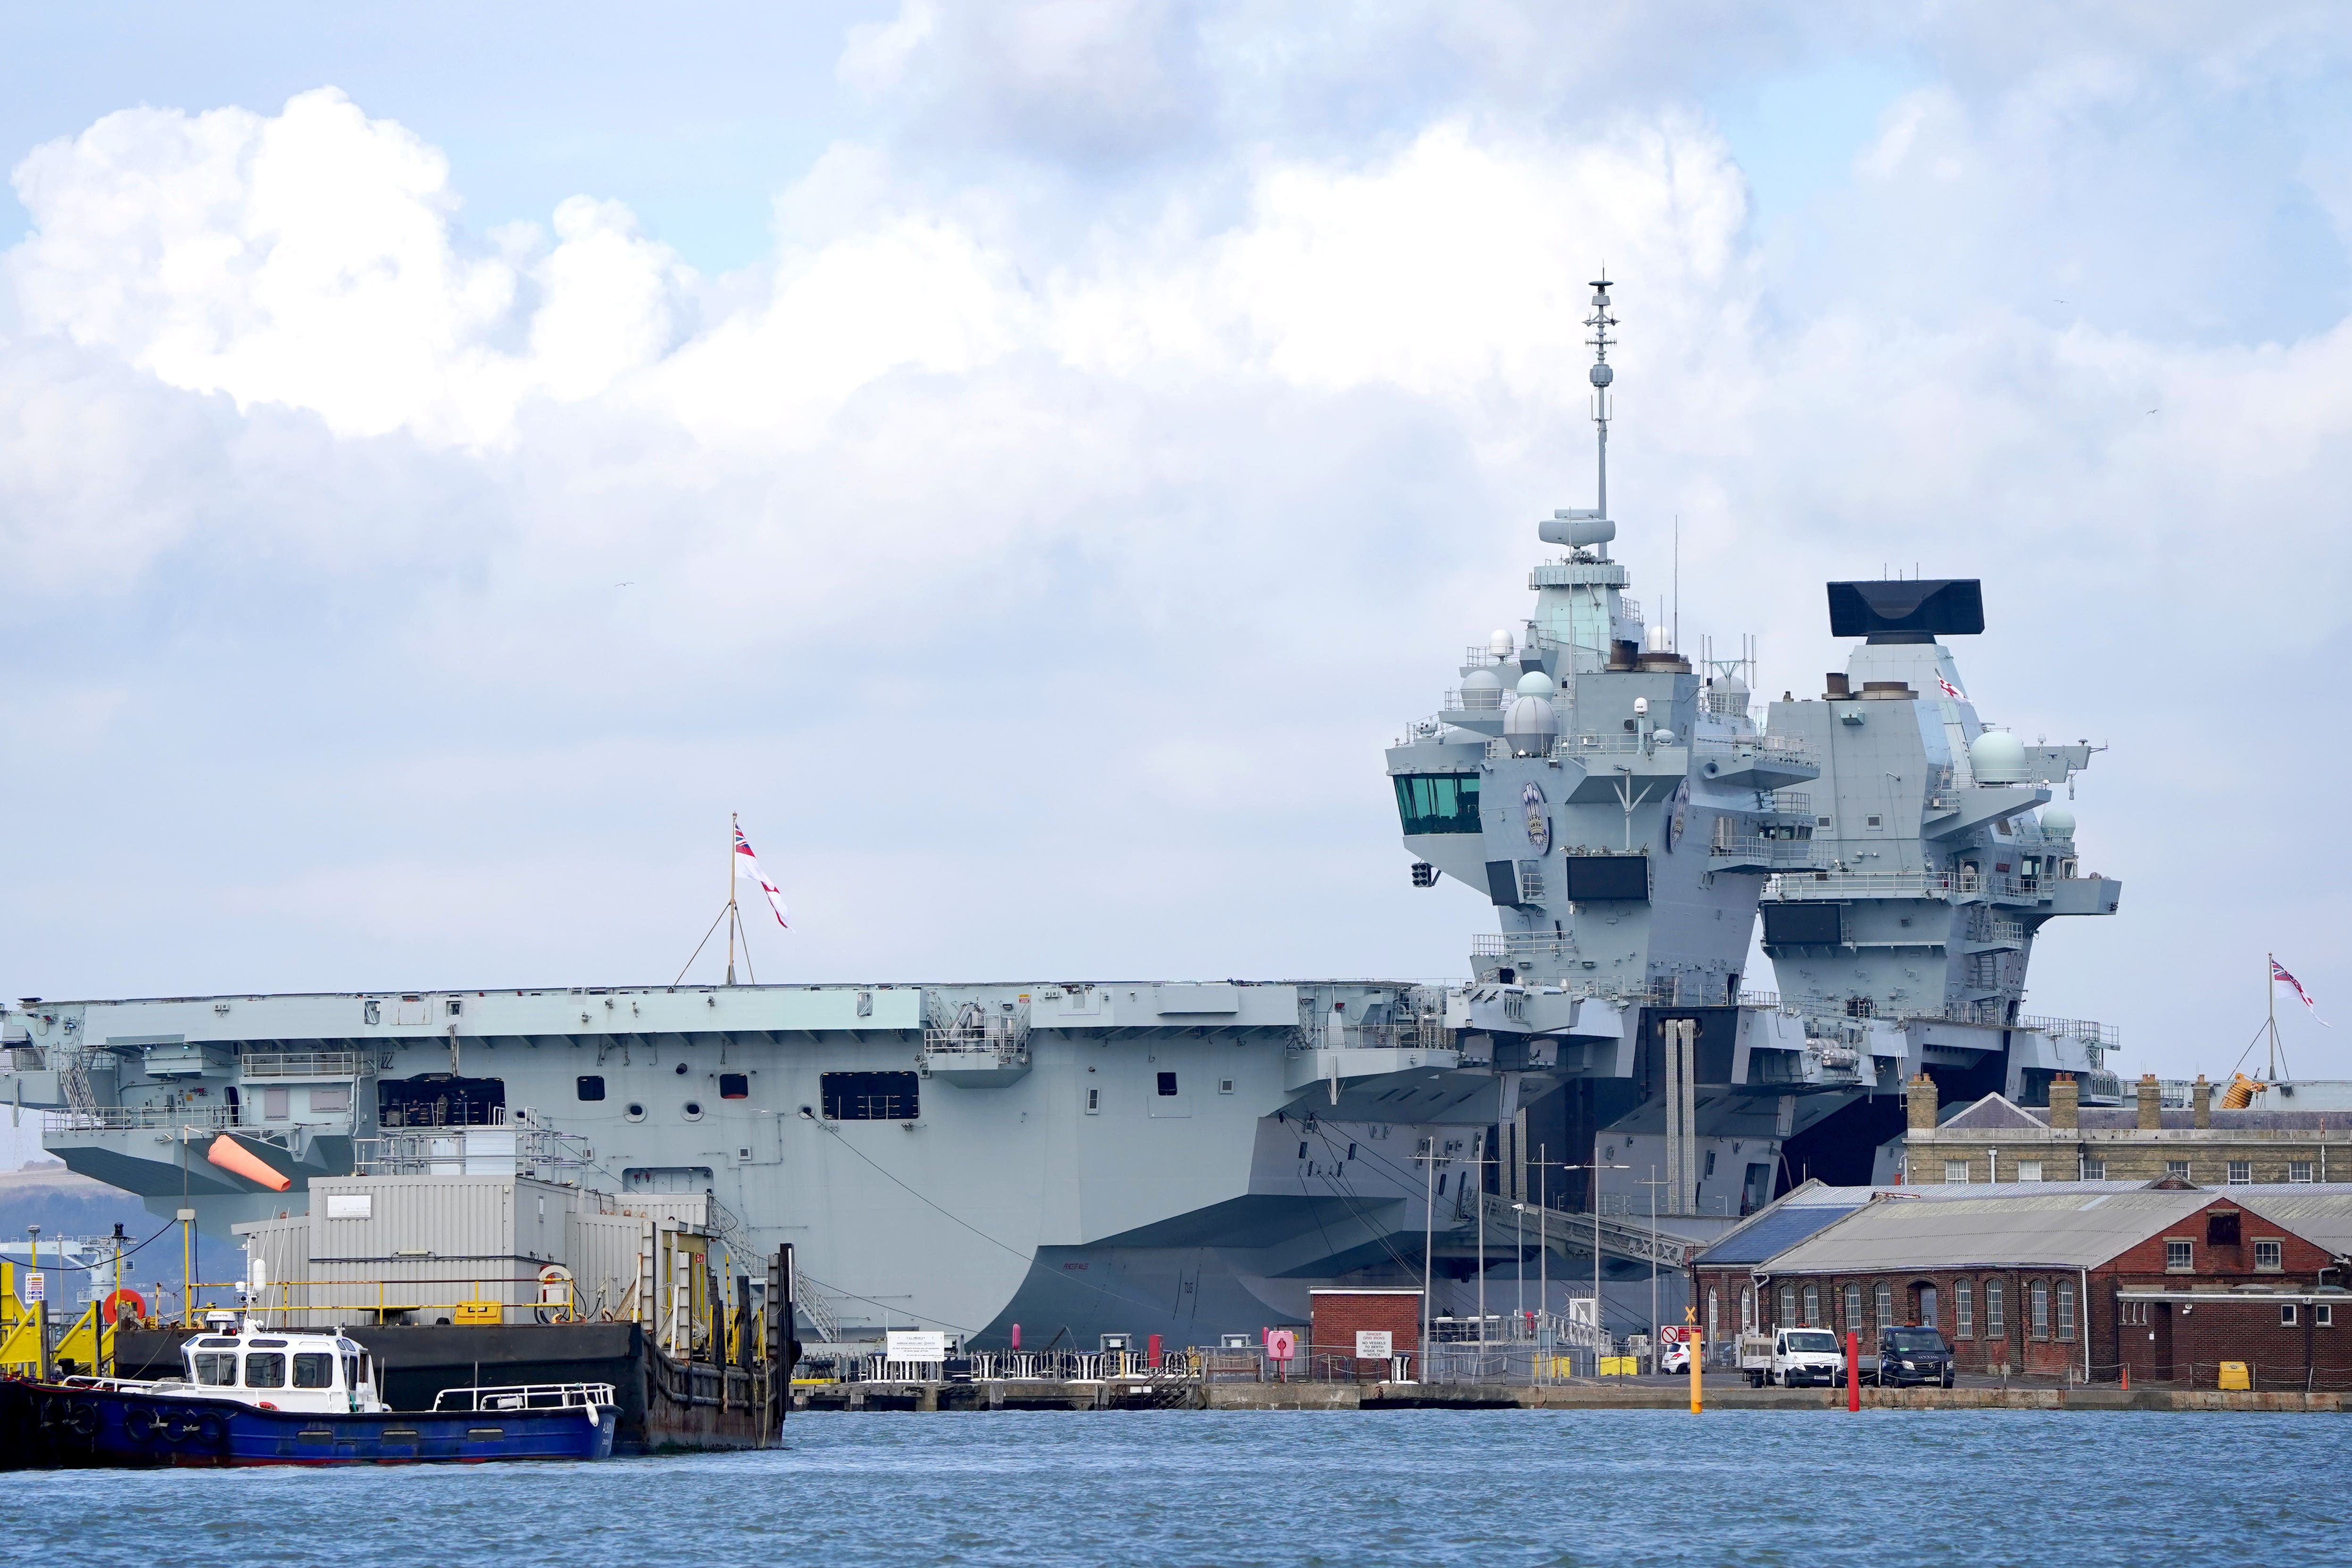 Security minister Tom Tugendhat has said it is ‘not acceptable’ that Royal Navy warship HMS Prince of Wales is sitting in dock when it should be out ‘defending our interests abroad’ (Gareth Fuller/PA)